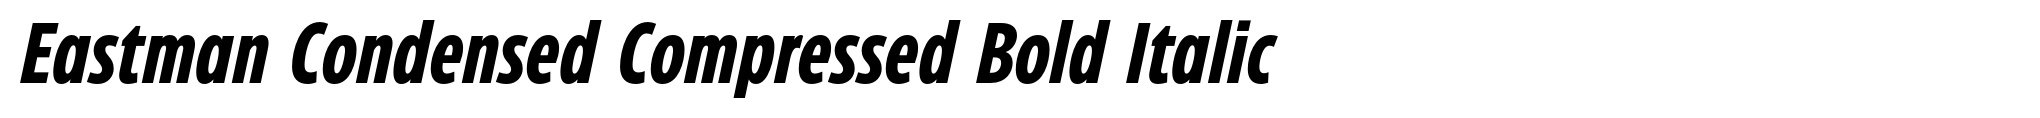 Eastman Condensed Compressed Bold Italic image